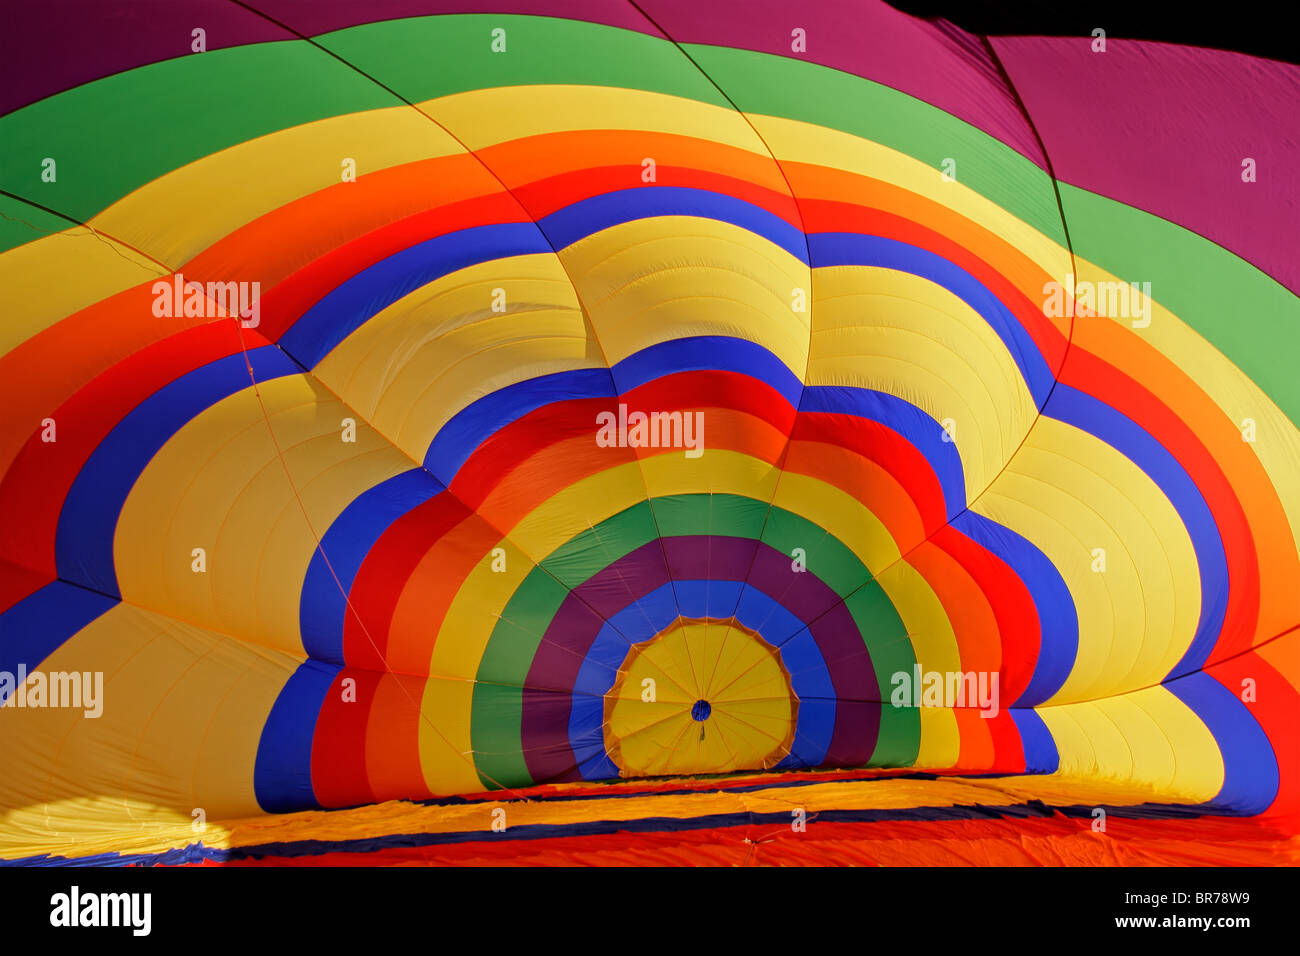 Inside of a colorful hot air balloon during inflation Stock Photo